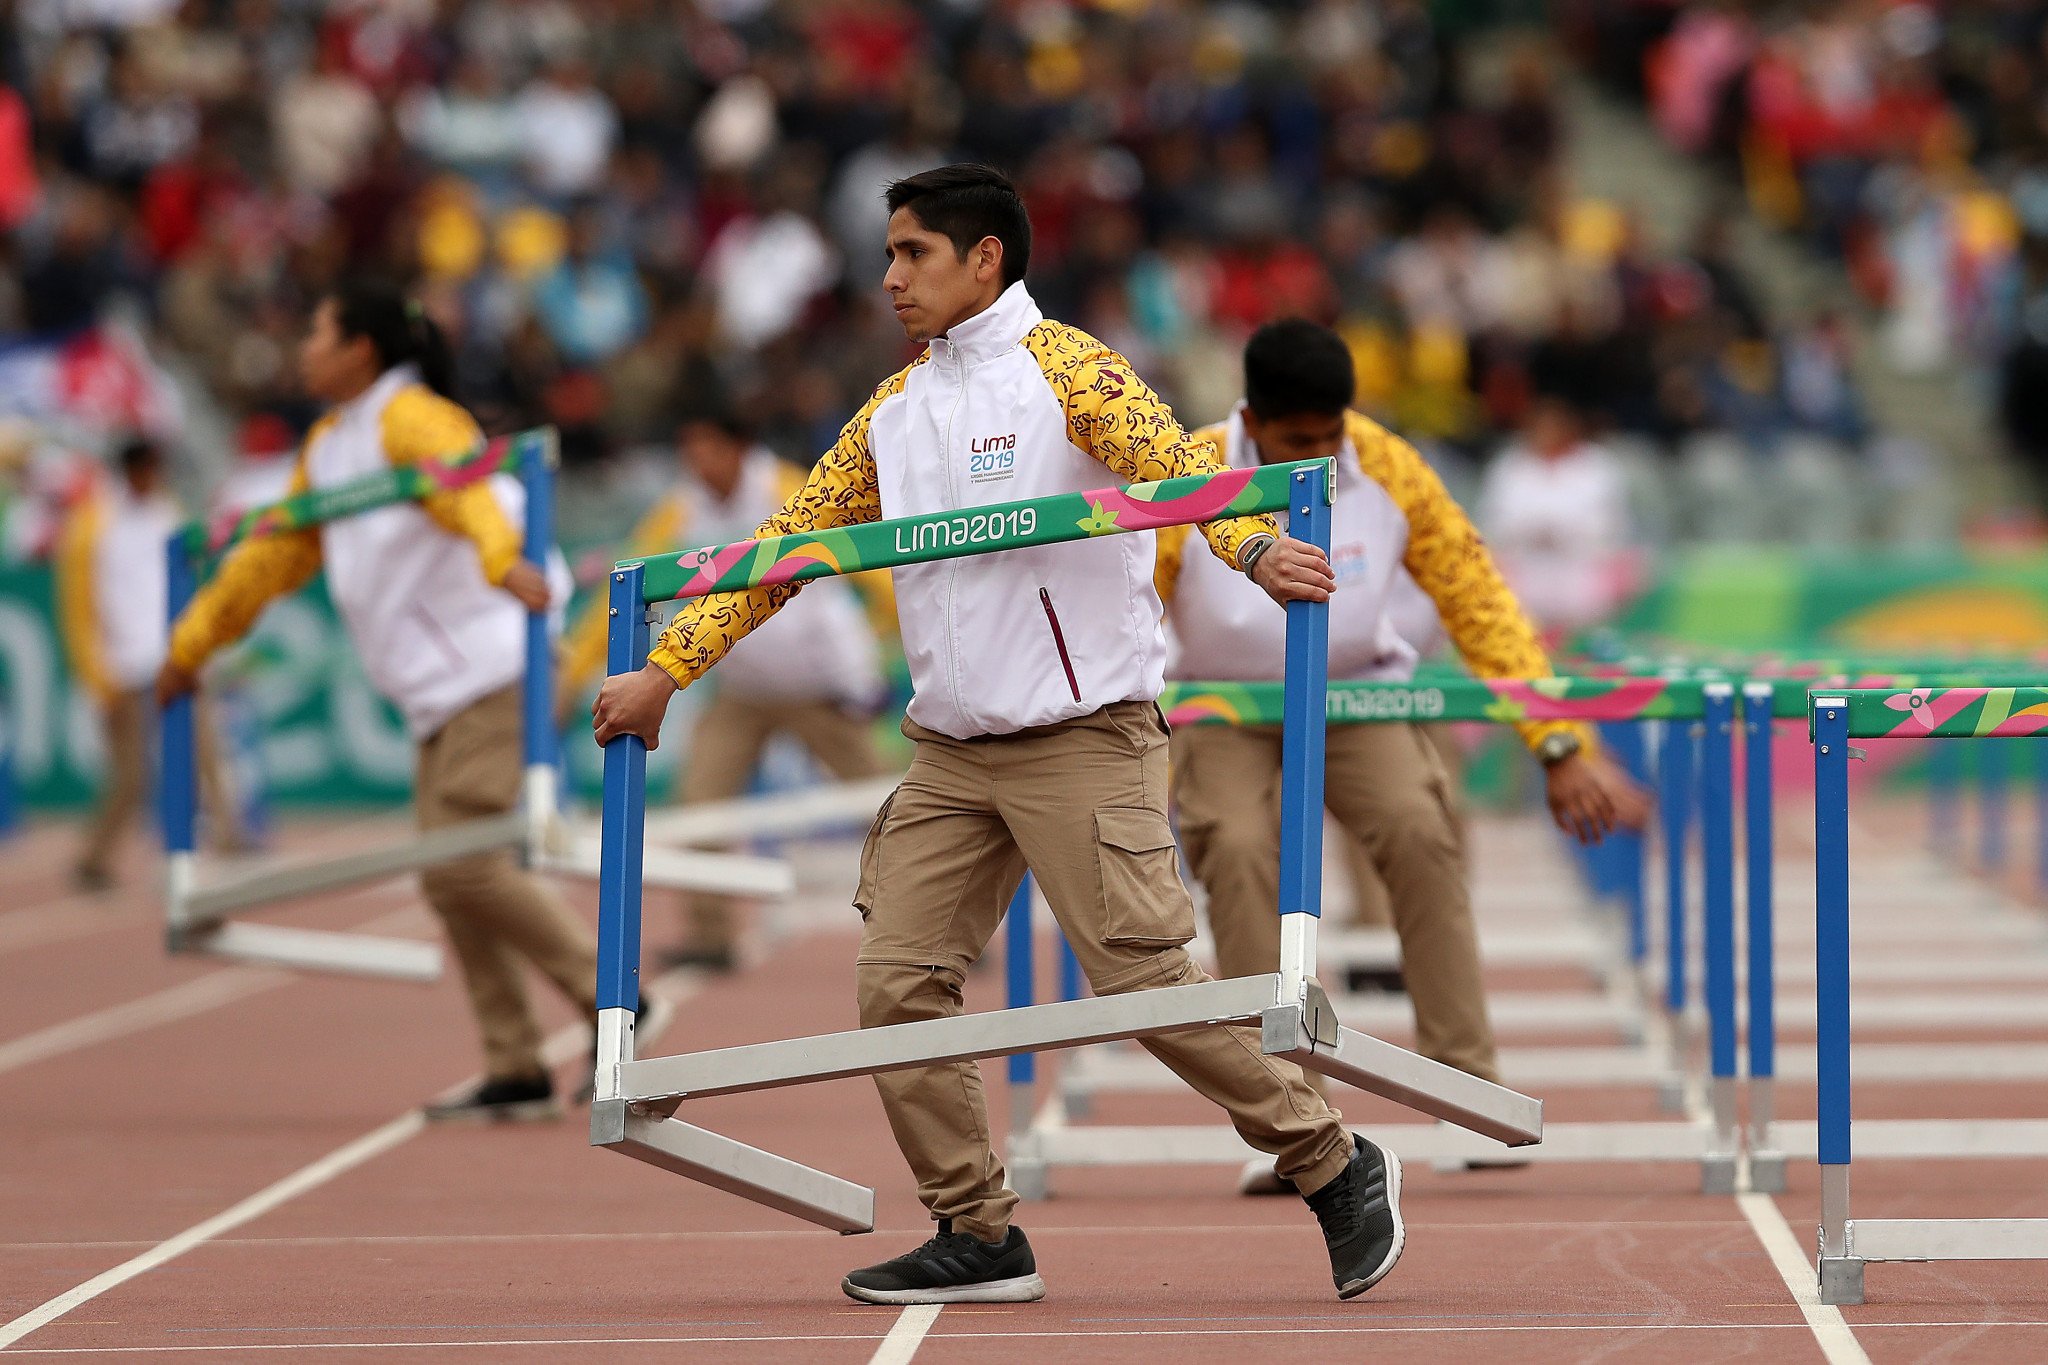 Campaign to recruit volunteers for Cali 2021 Junior Pan American Games ends